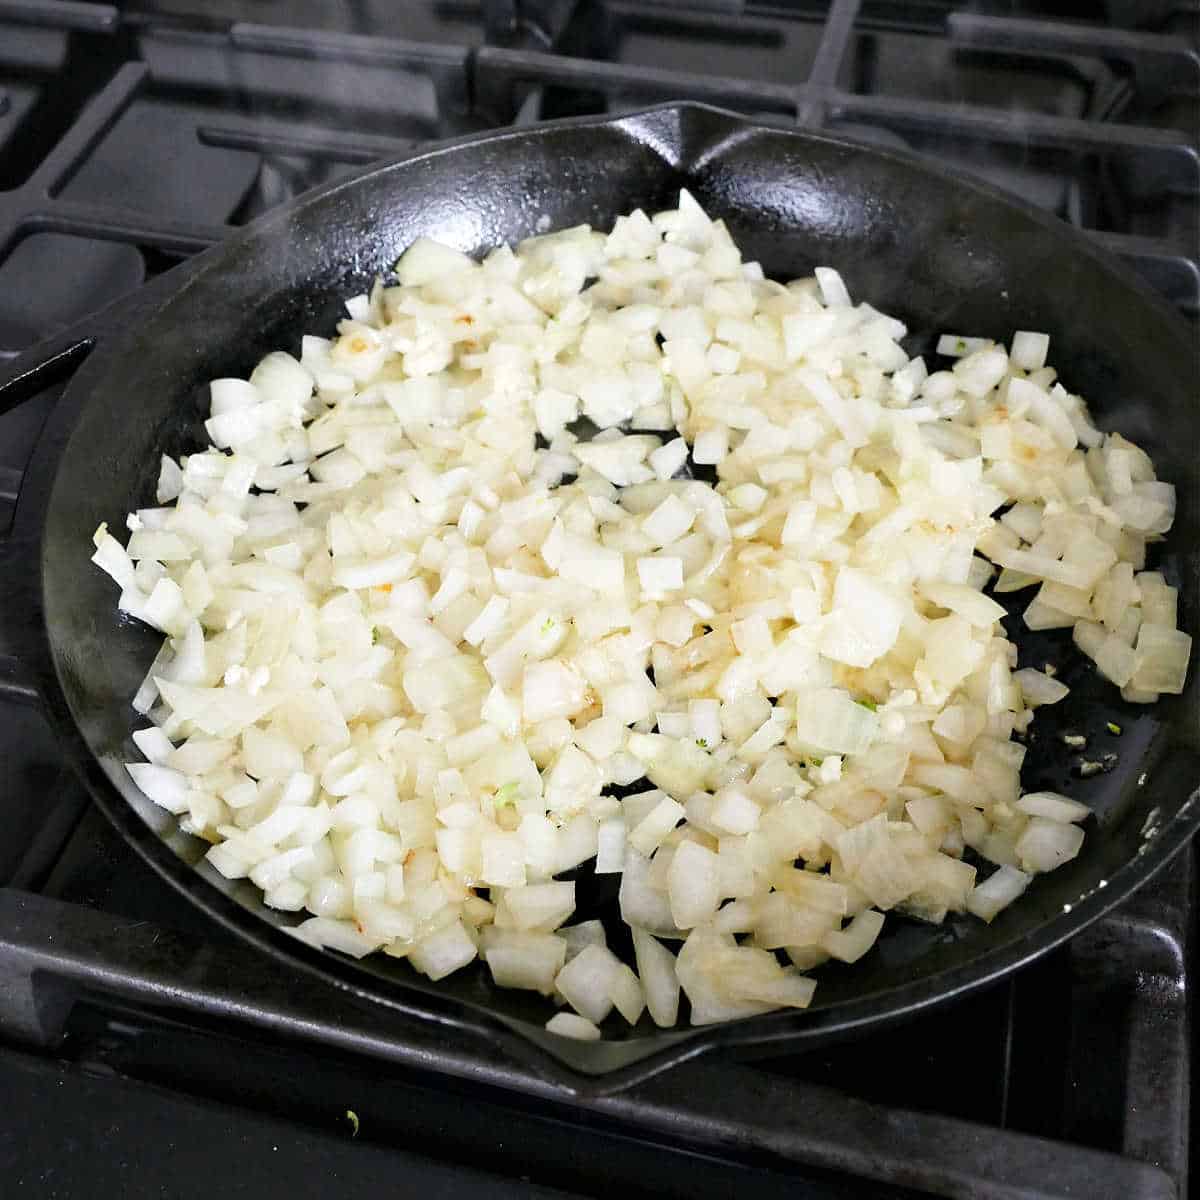 onion and garlic cooking in olive oil in a cast iron skillet on a stove